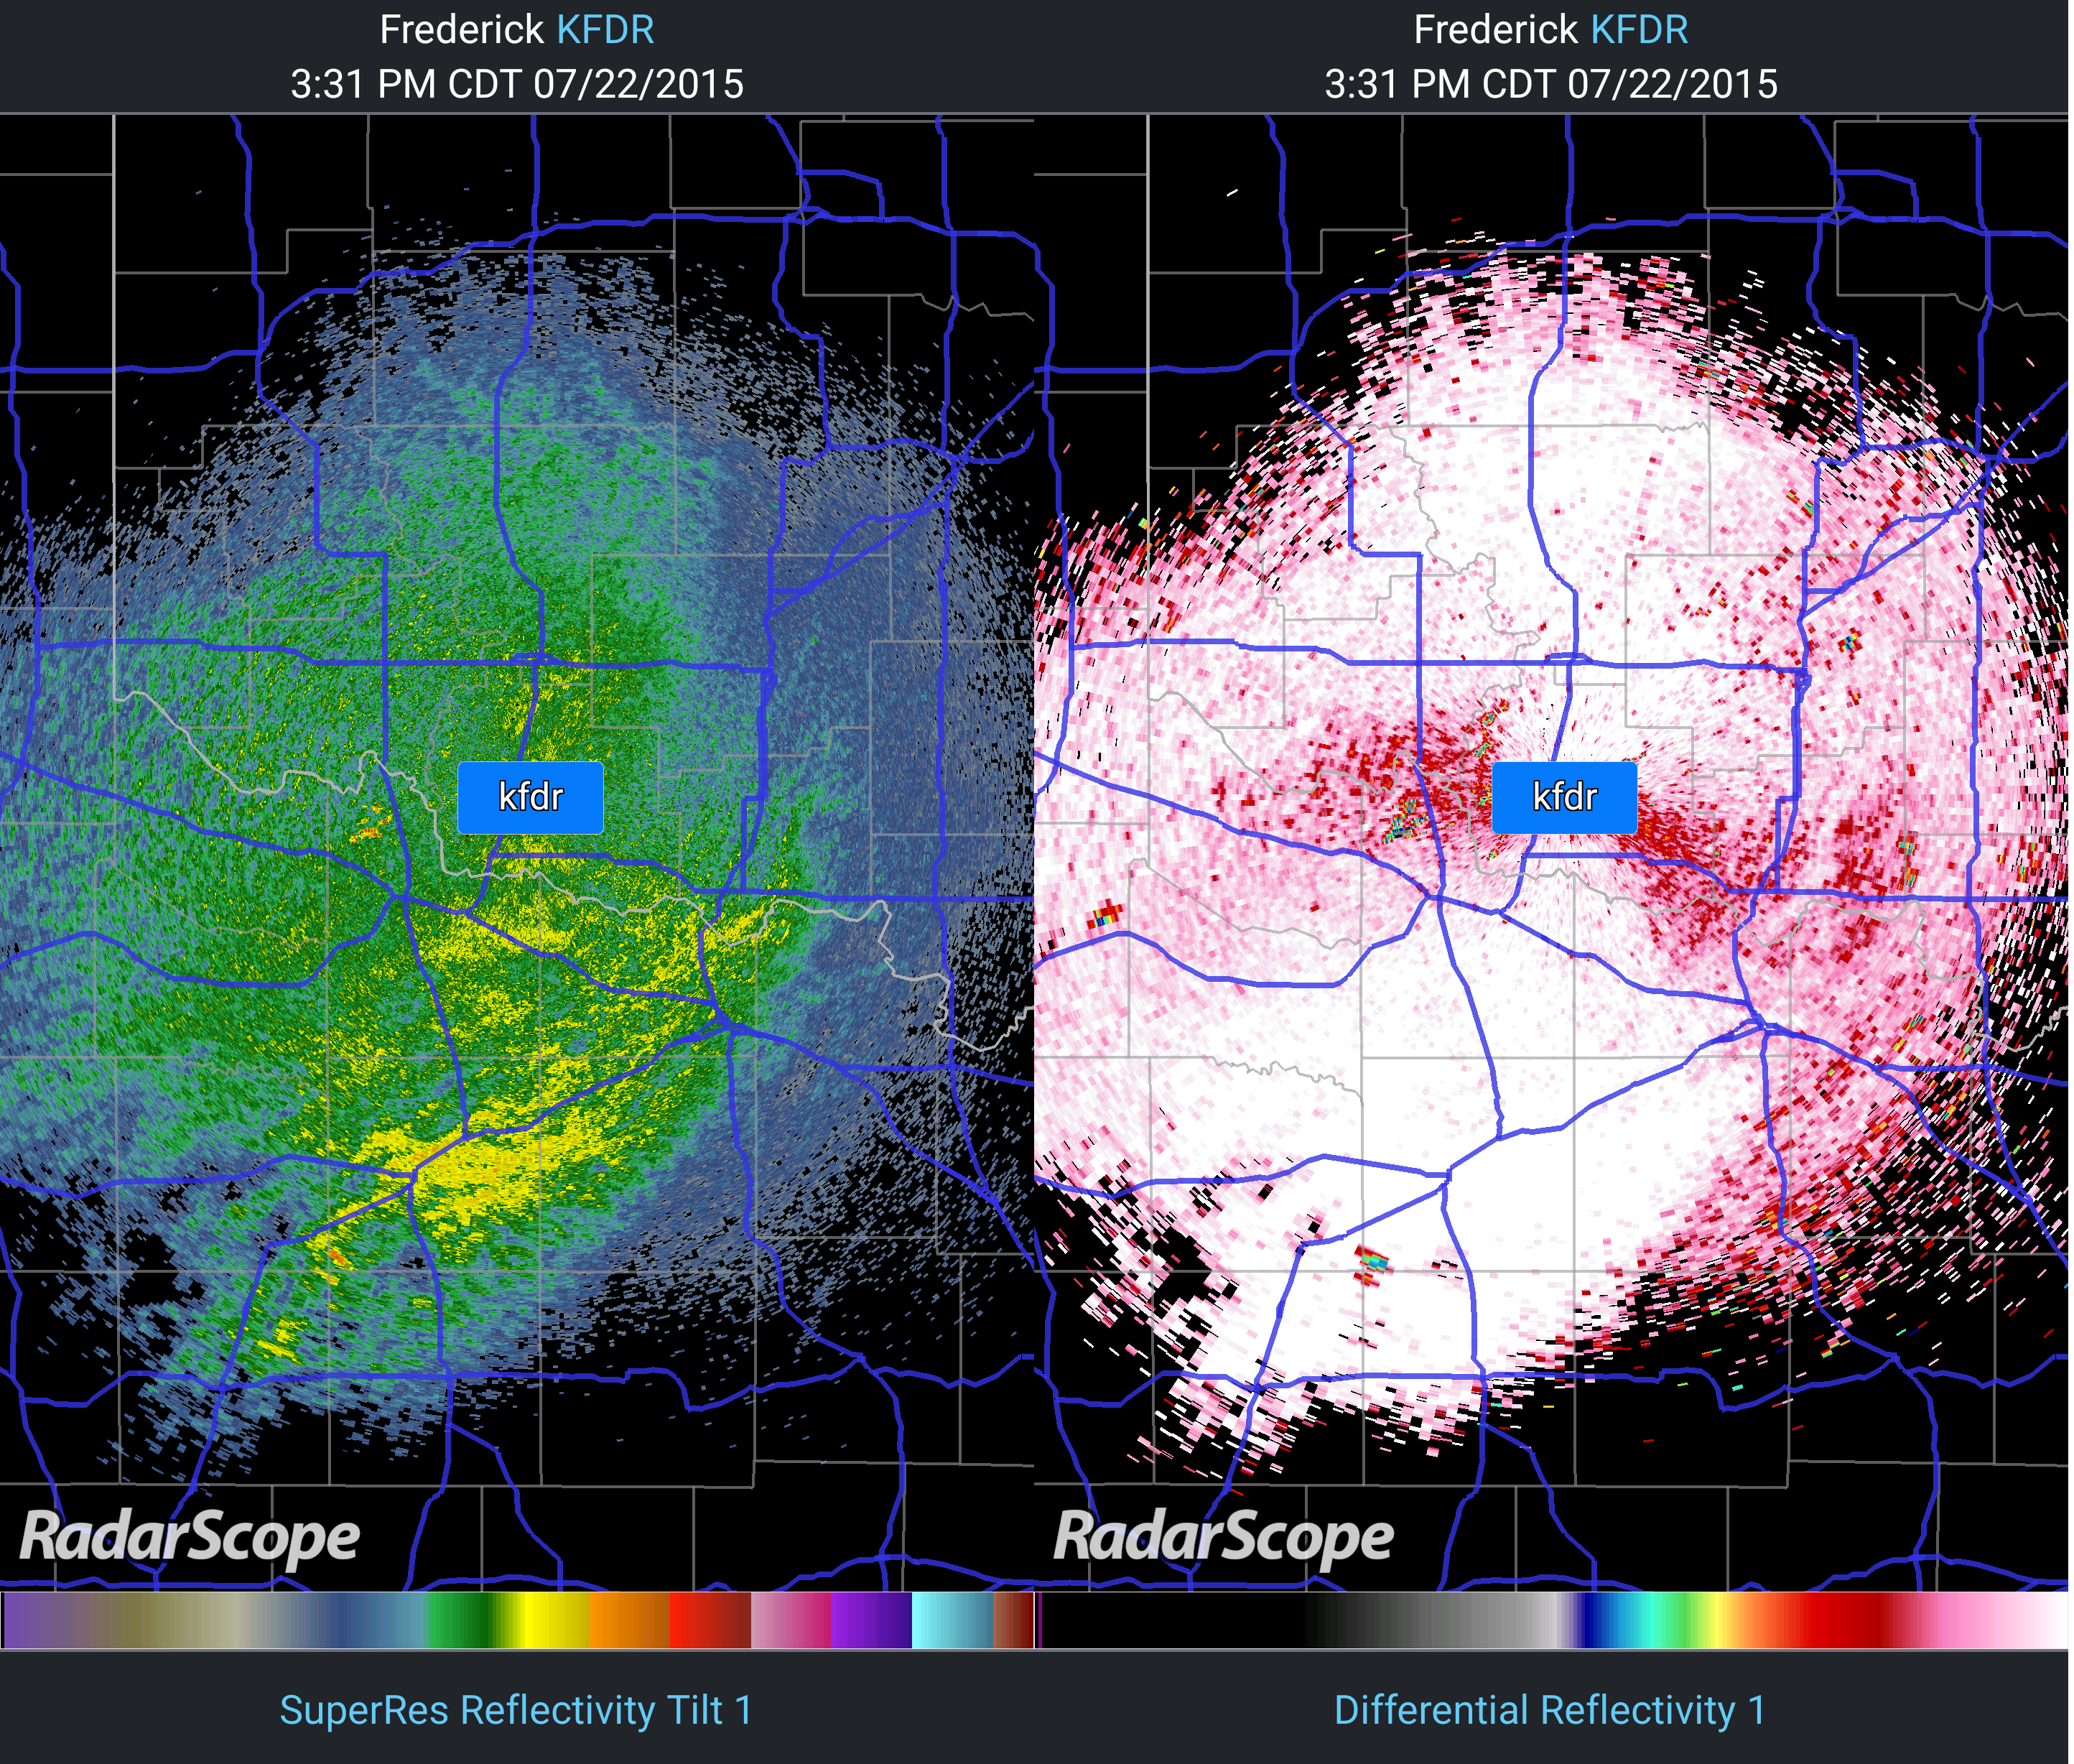 Radar reflectivity and differential reflectivity from KFDR showing swarm of grasshoppers.